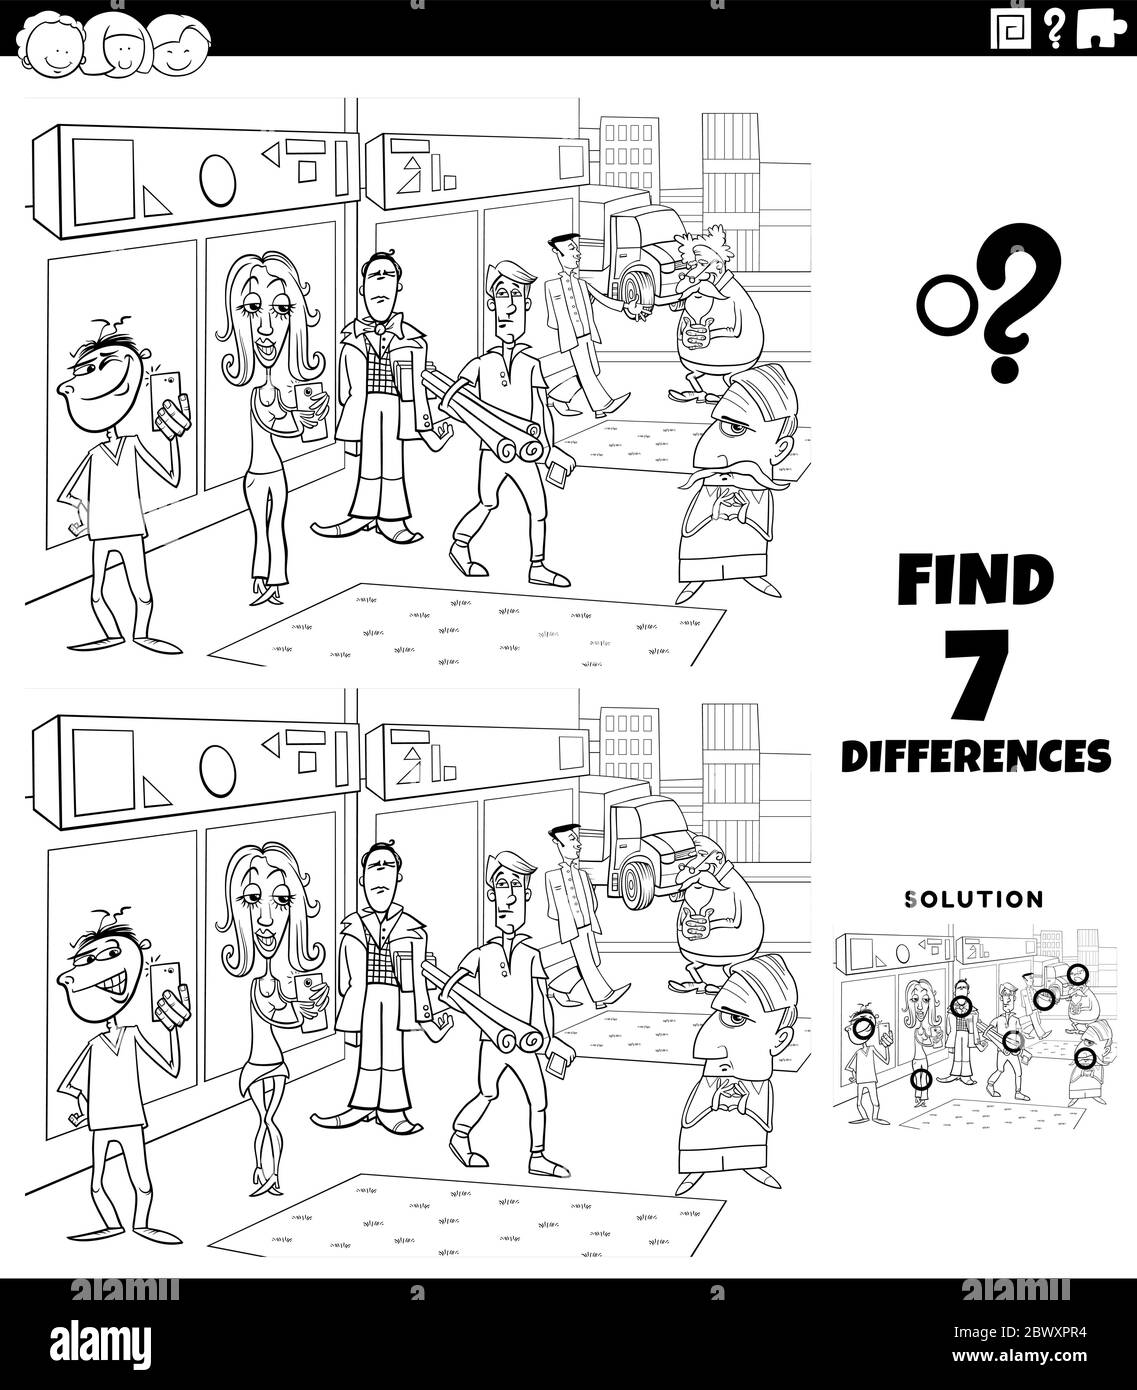 Black and White Cartoon Illustration of Finding Differences Between ...